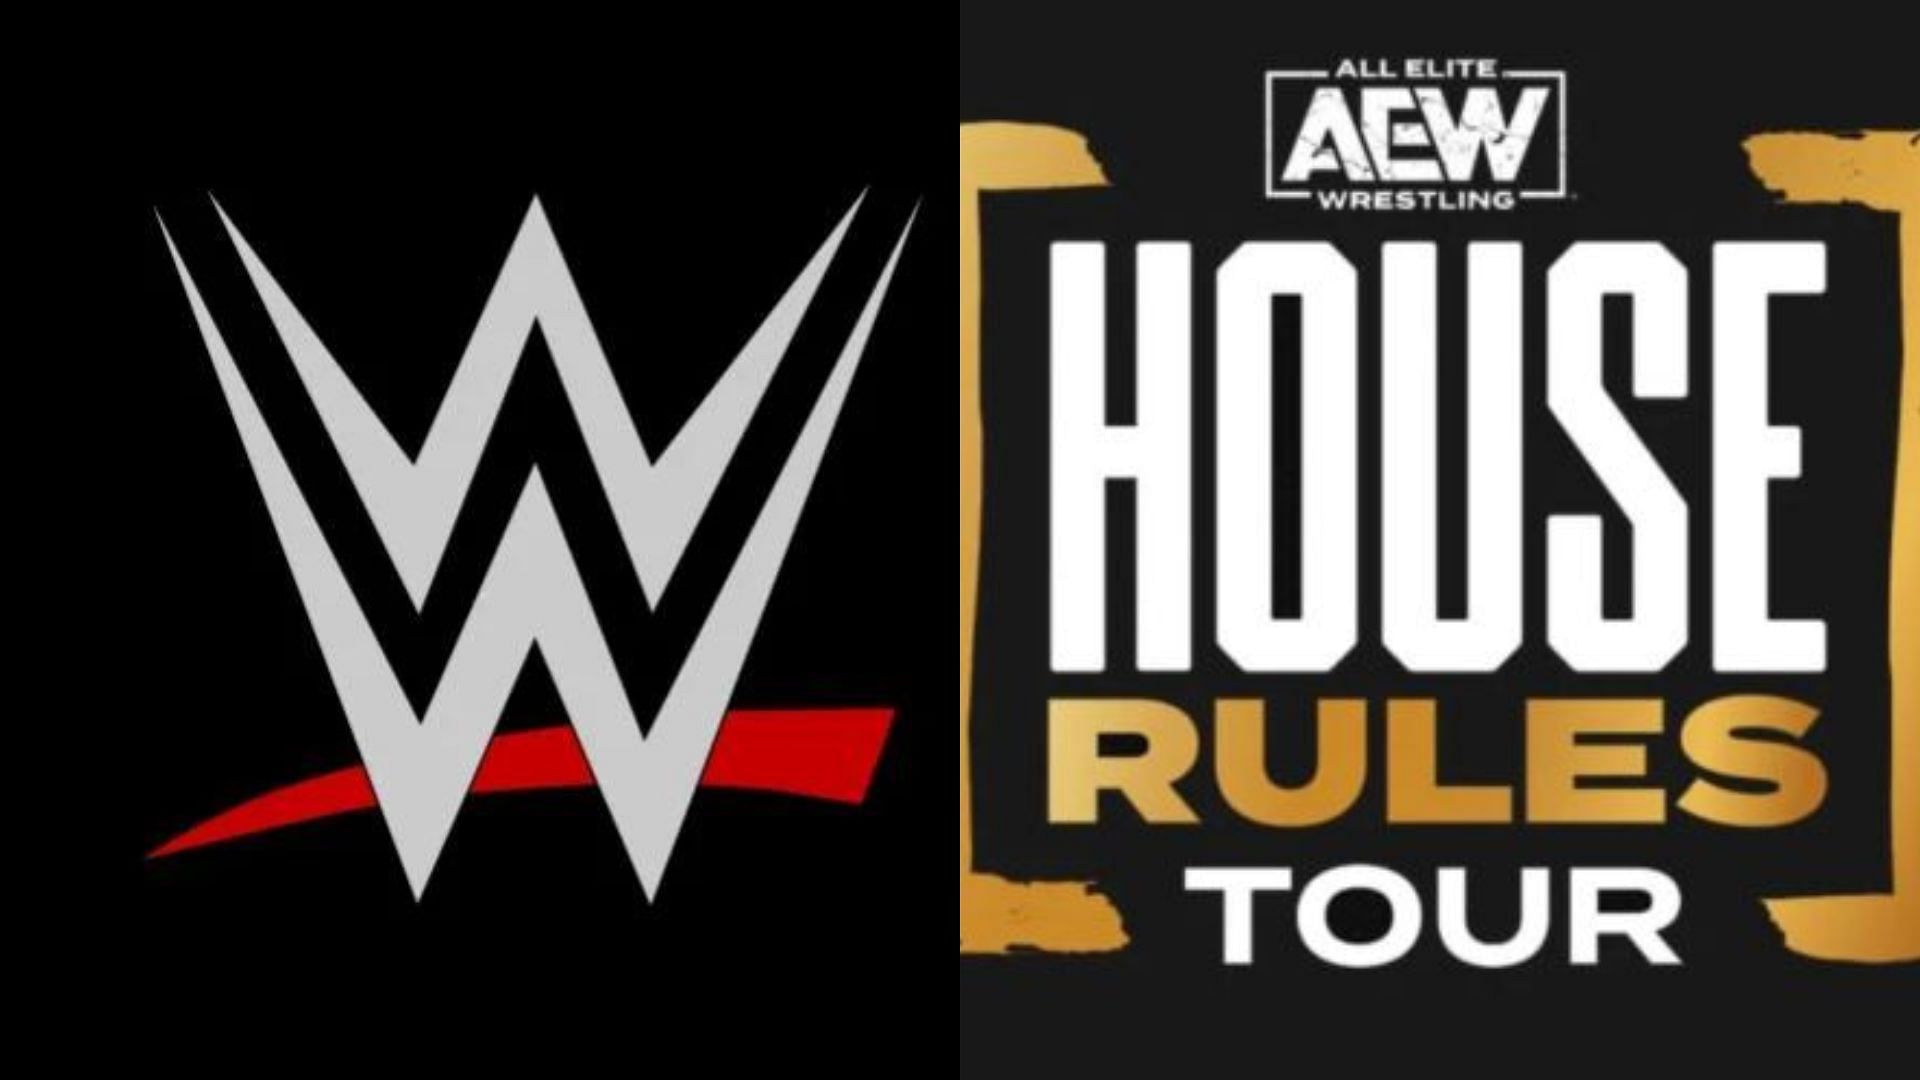 Which WWE legend has been helping out at AEW house shows?